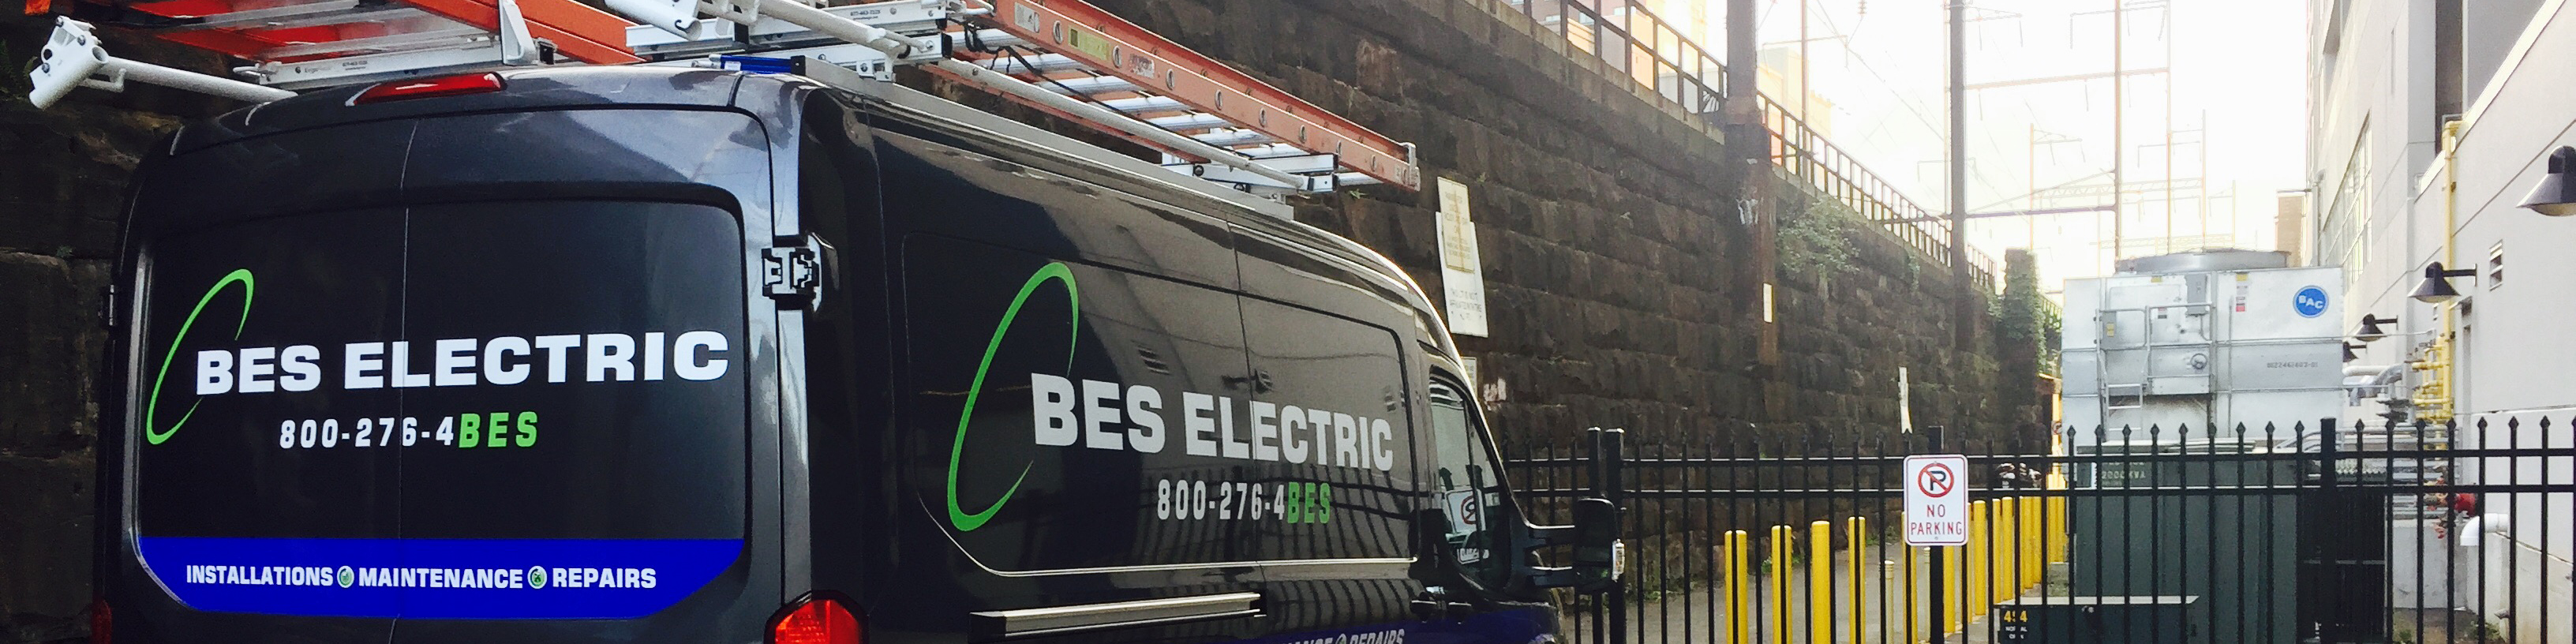 BES ELECTRIC